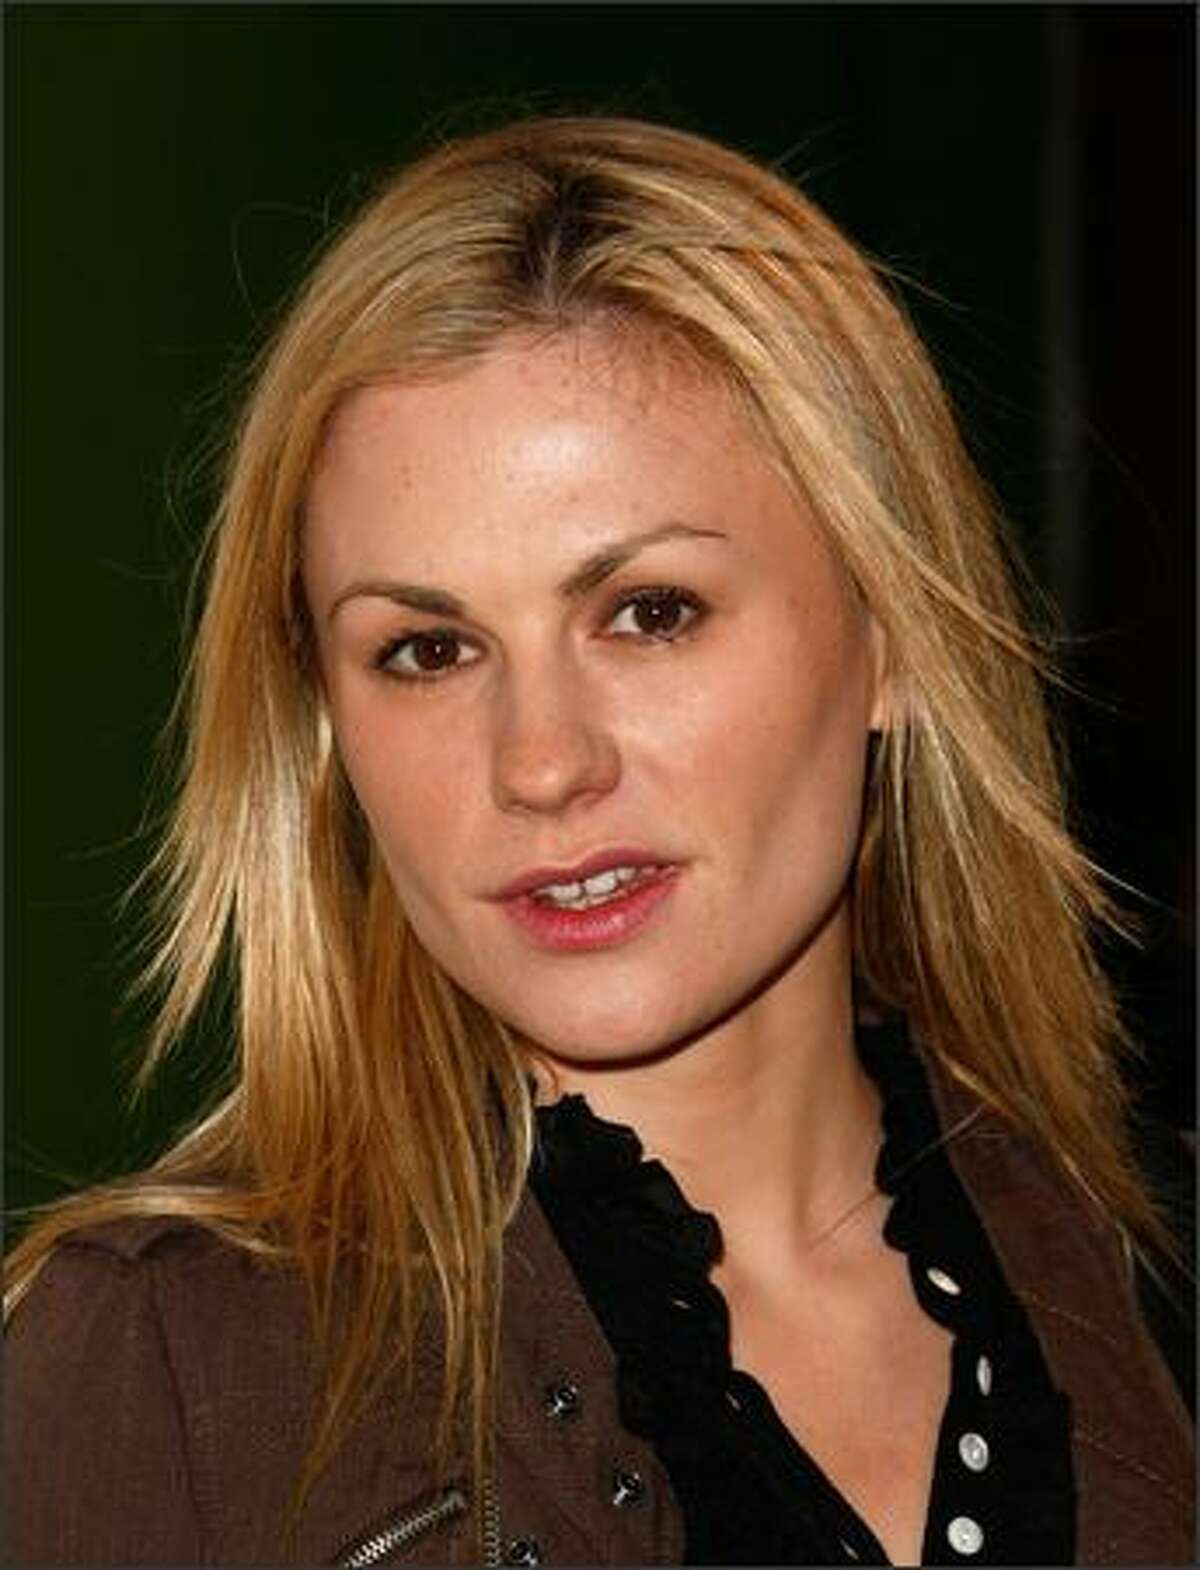 Actress Anna Paquin arrives for the launch of Loomstate For Target Collection at the Big Red Sun in Venice, California.